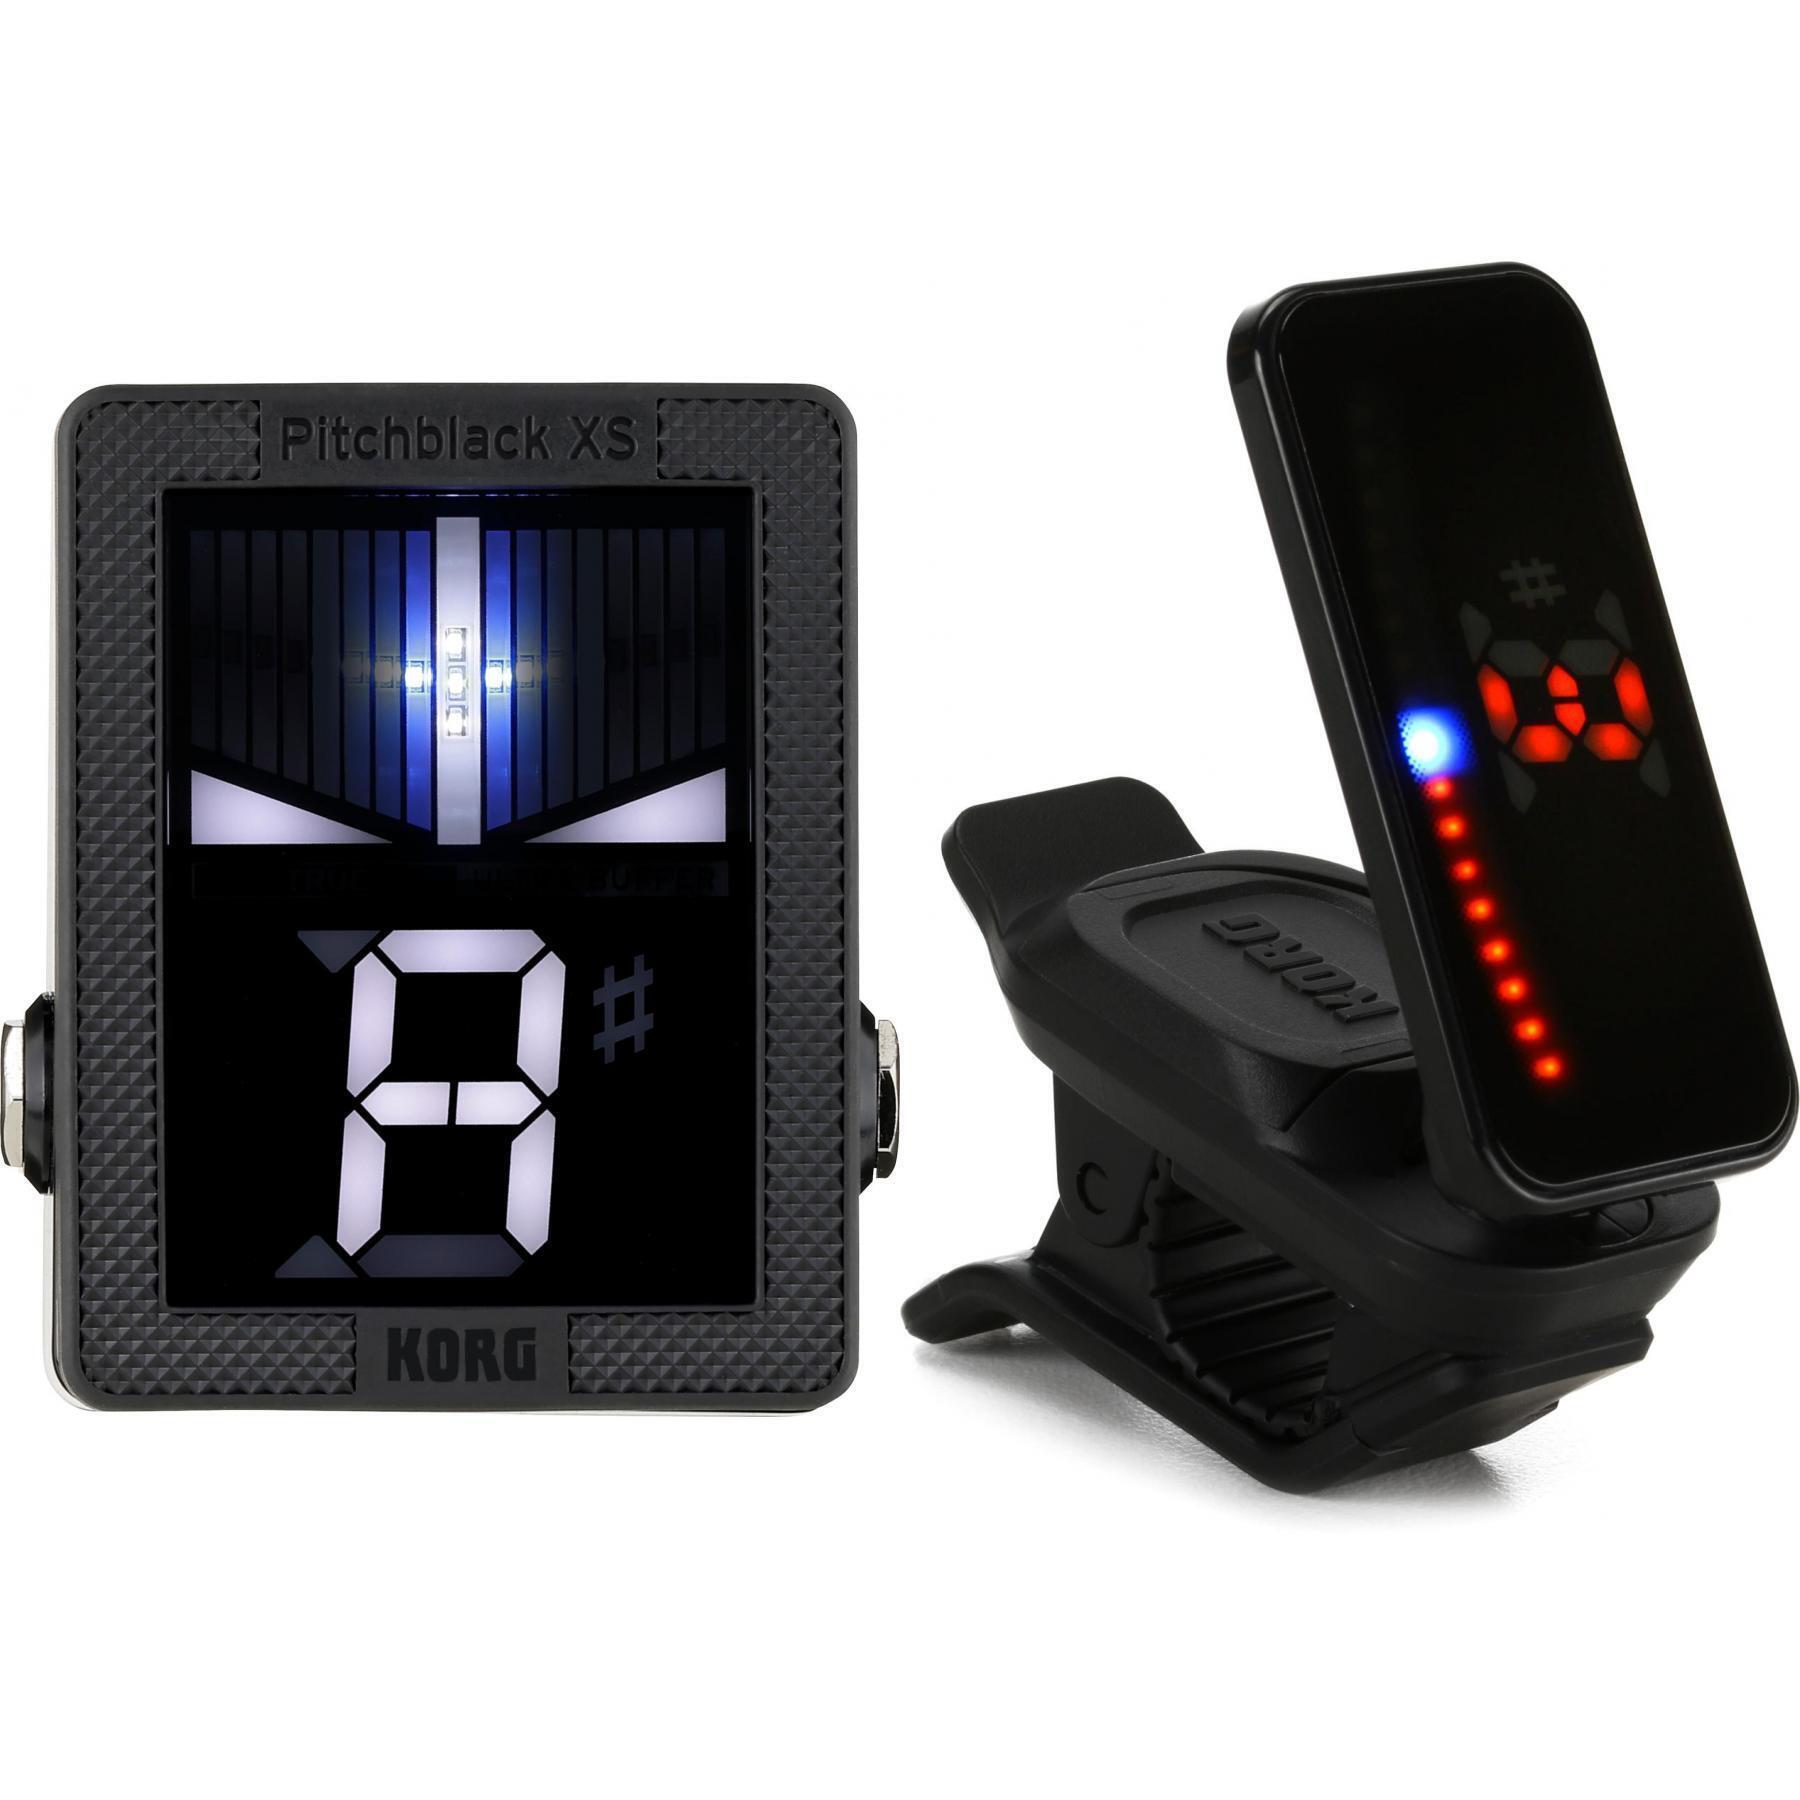 Korg Pitchblack XS Custom Pedal Tuner and Pitchclip 2 Plus